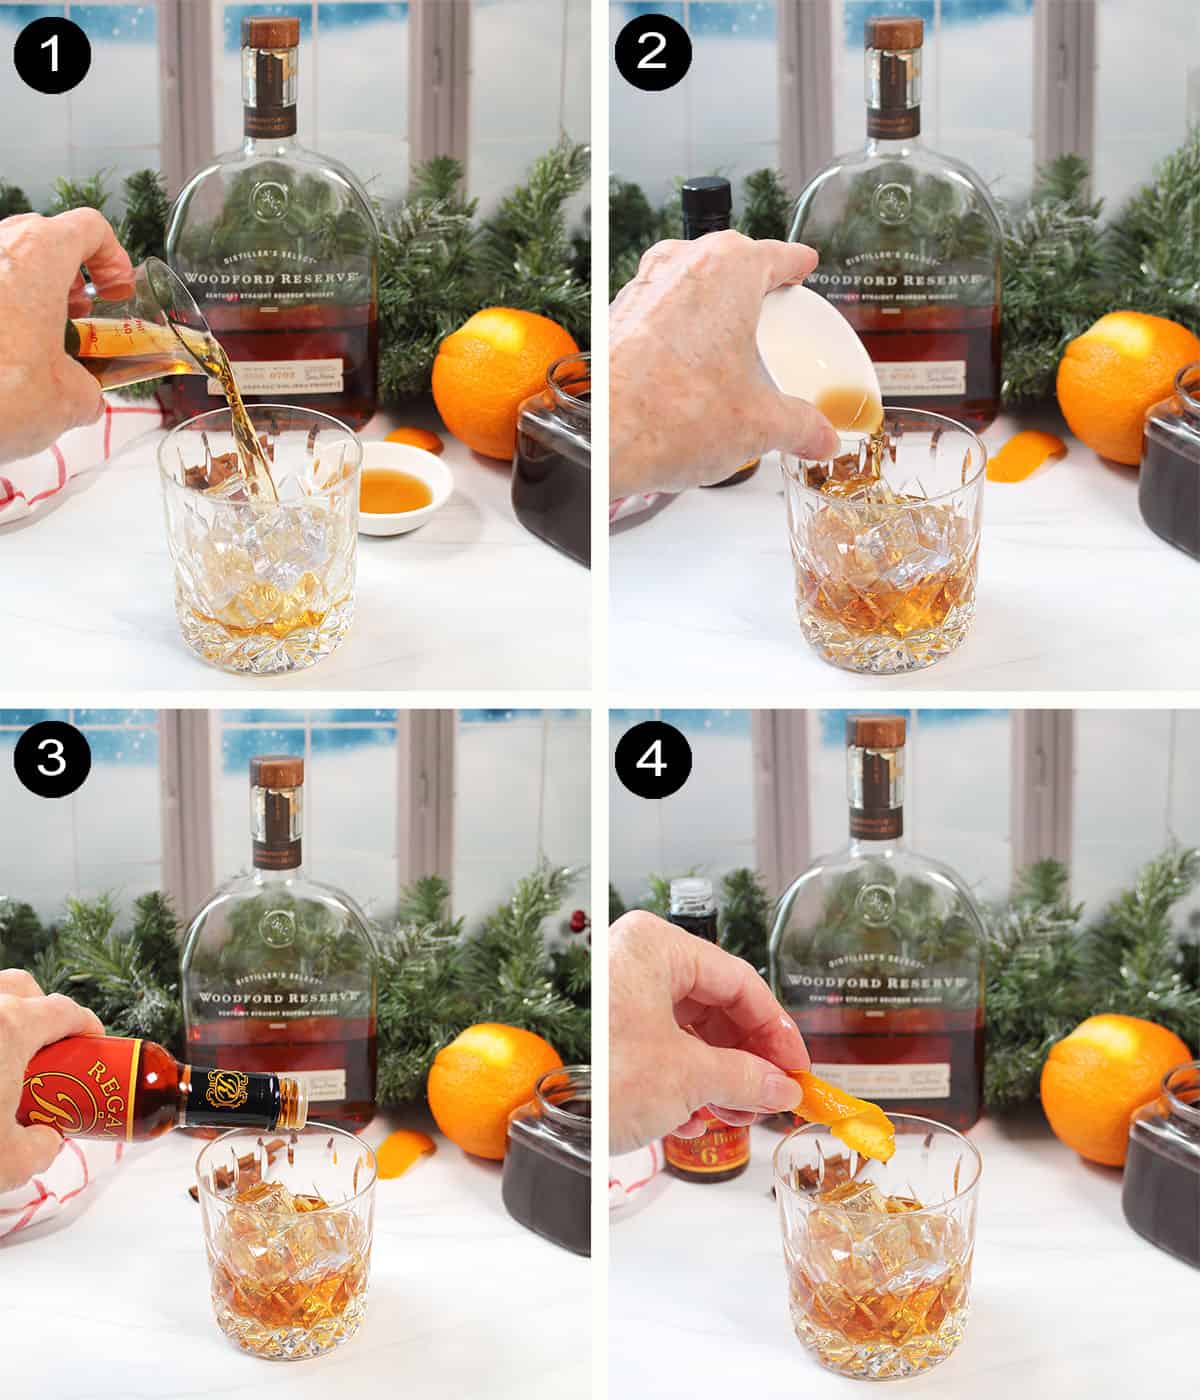 Steps to make old fashioned.